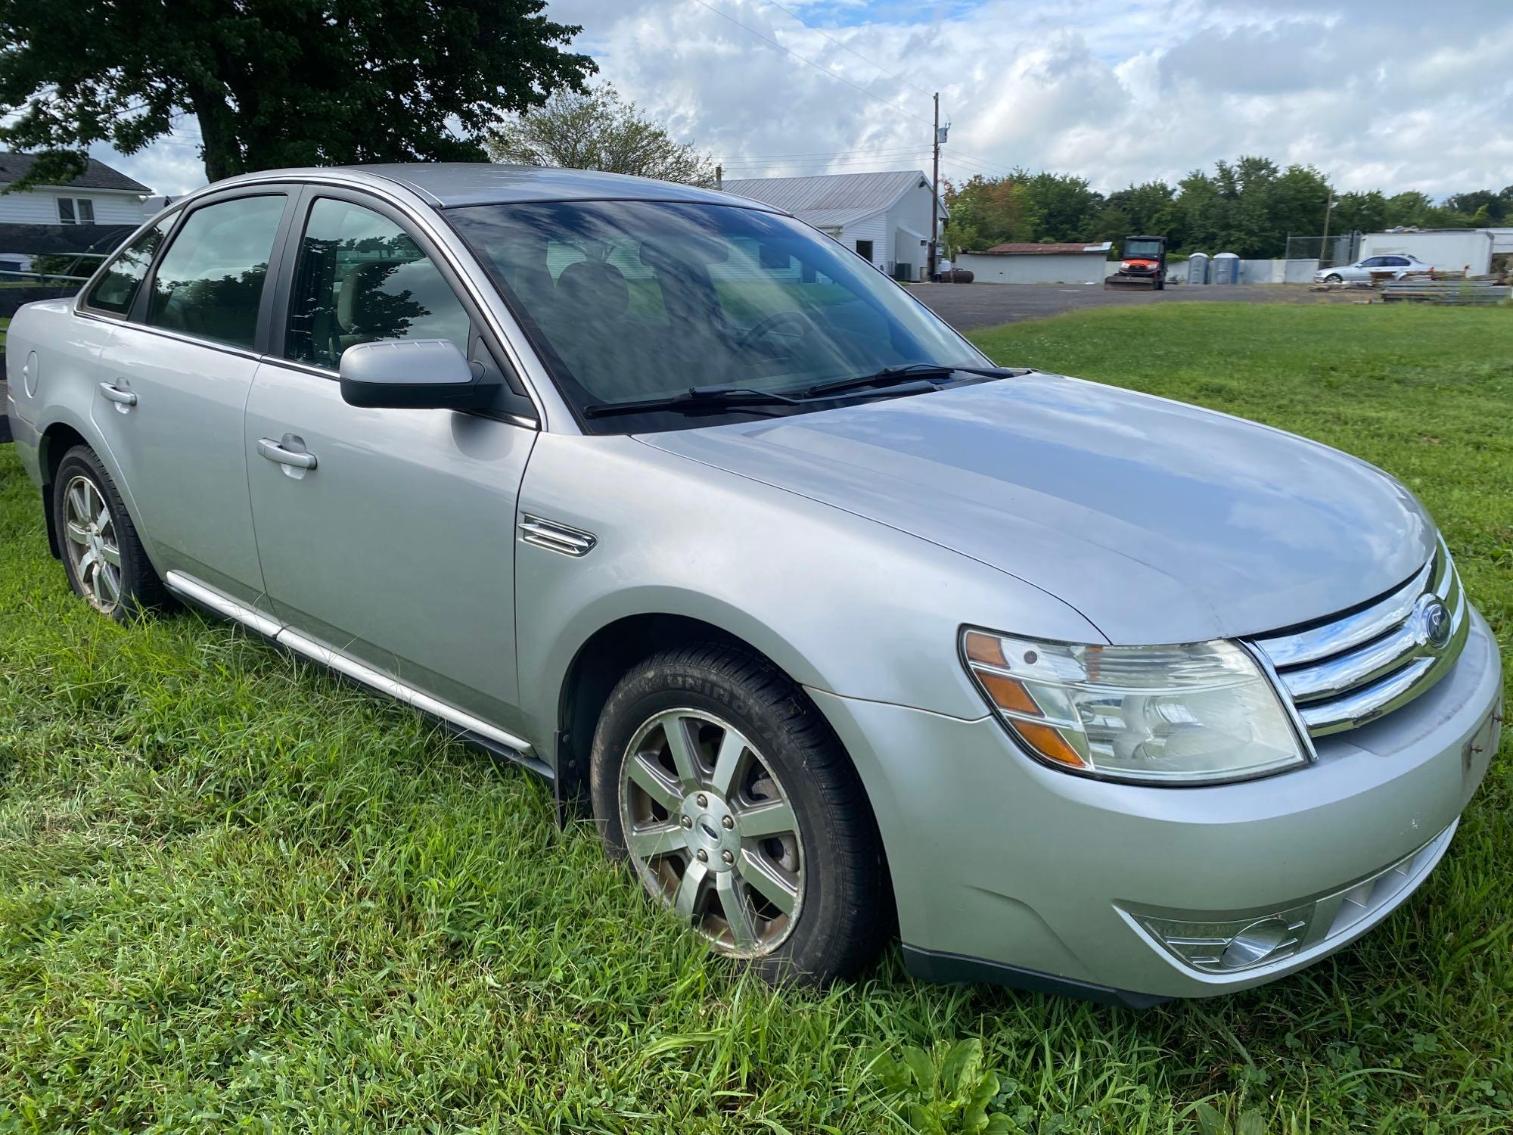 Image for 2009 Ford Taurus, Per Seller Good Running Car Replaced With New Vehicle In Fleet  1FAHP24W59G109864